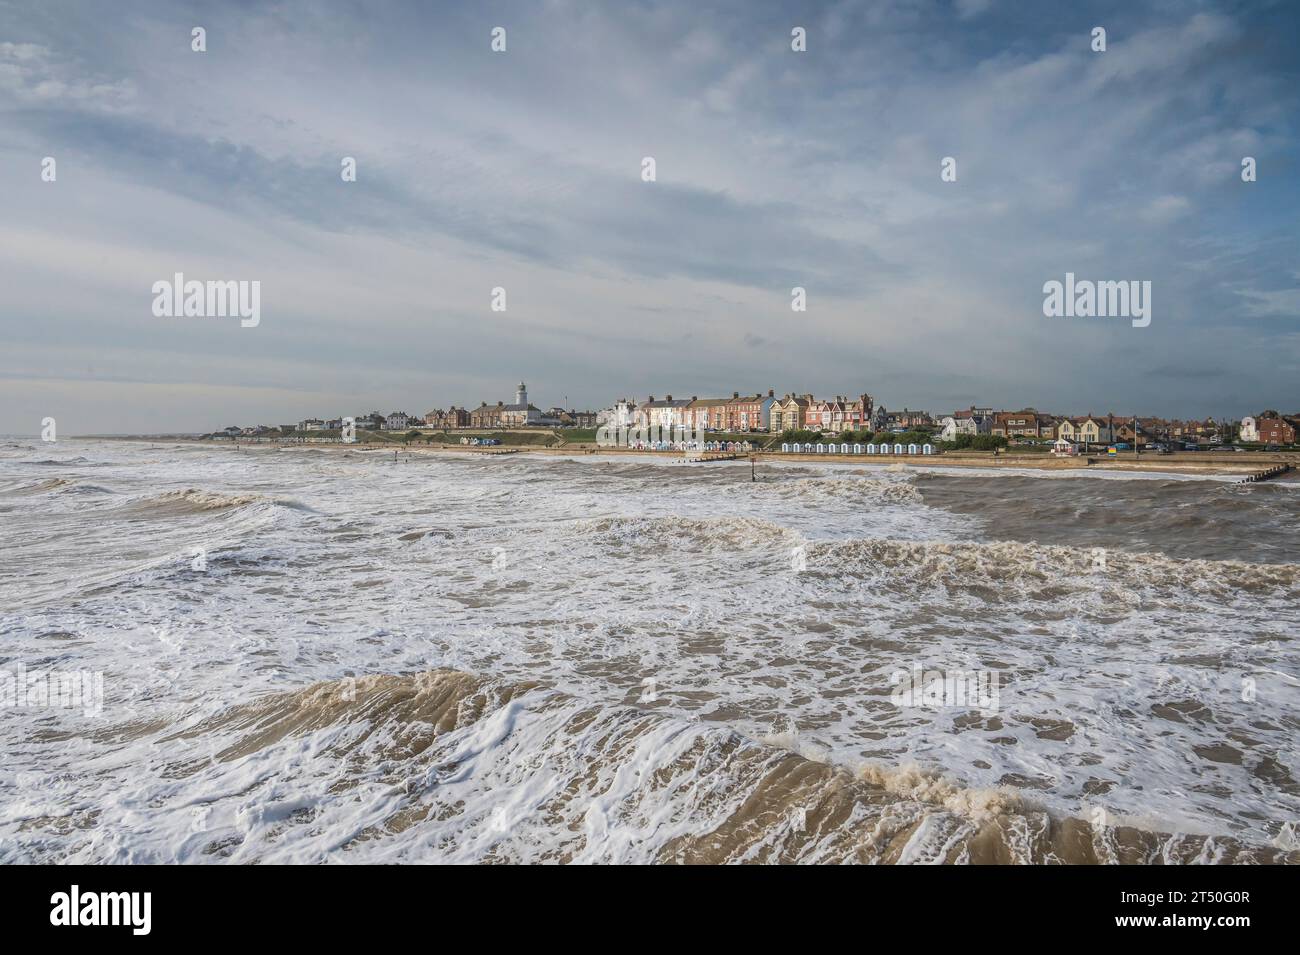 The image from Southwold Pier looking towards the lighthouse and promenade beach huts is at the coastal resort town of Southwold in Suffolk Stock Photo